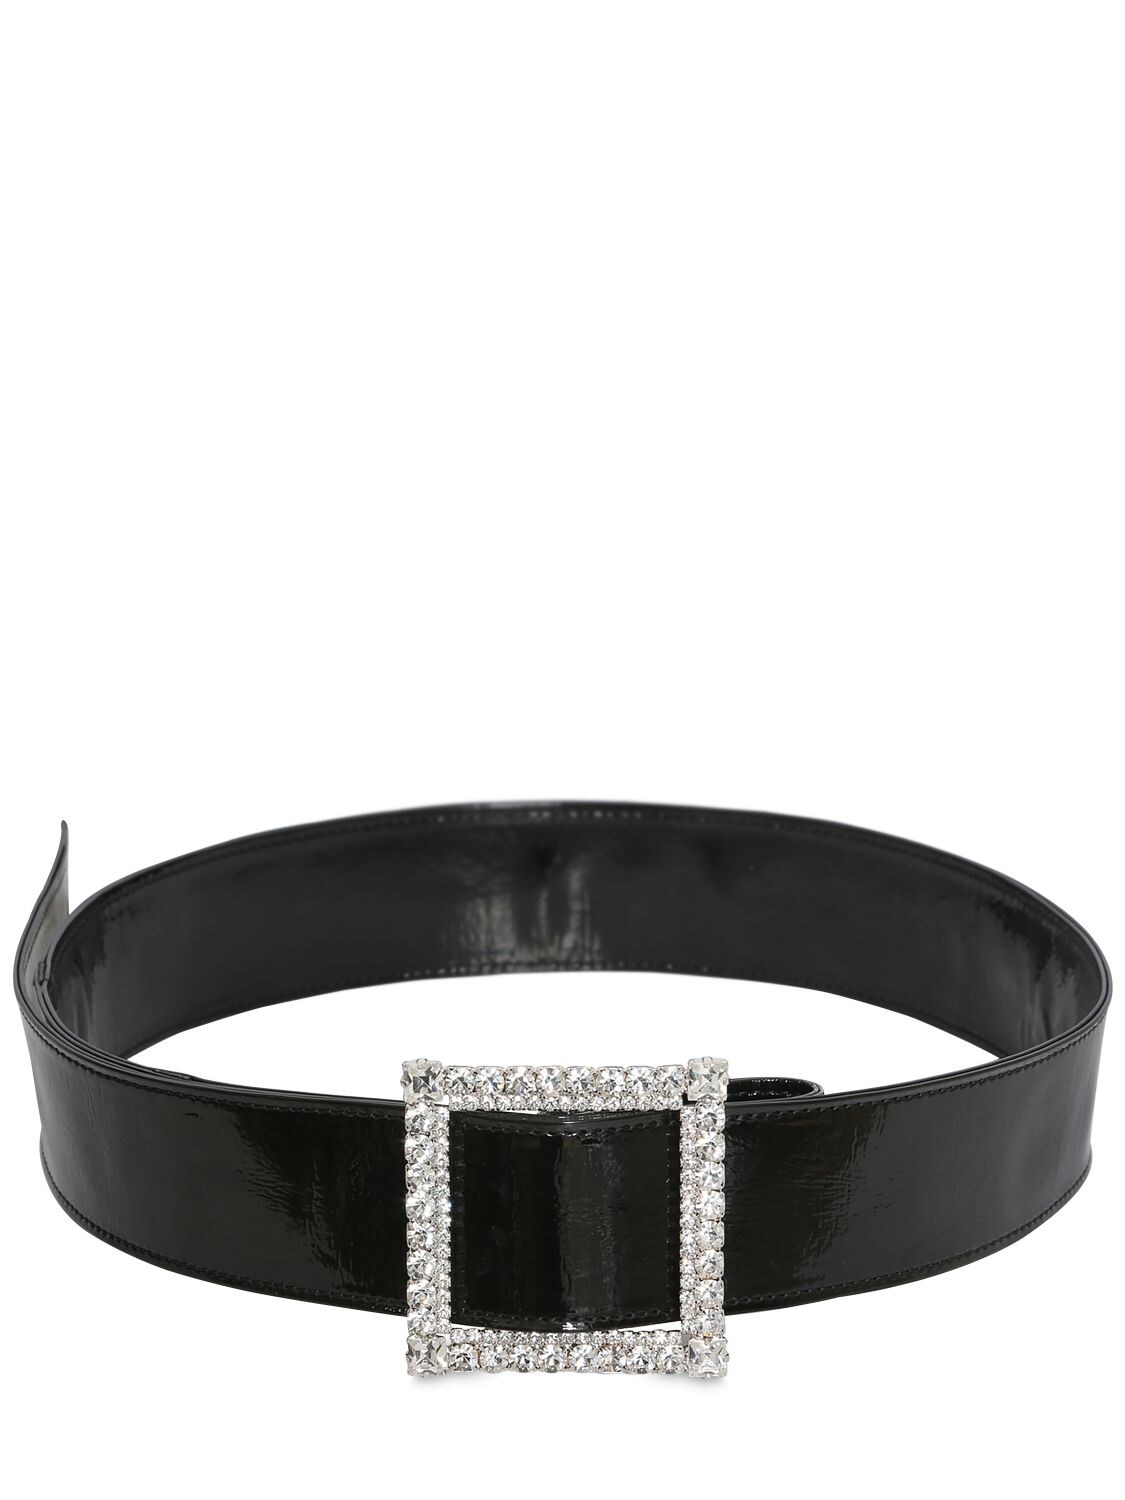 Alexandre Vauthier Patent Leather Belt W/ Crystal Buckle In Black